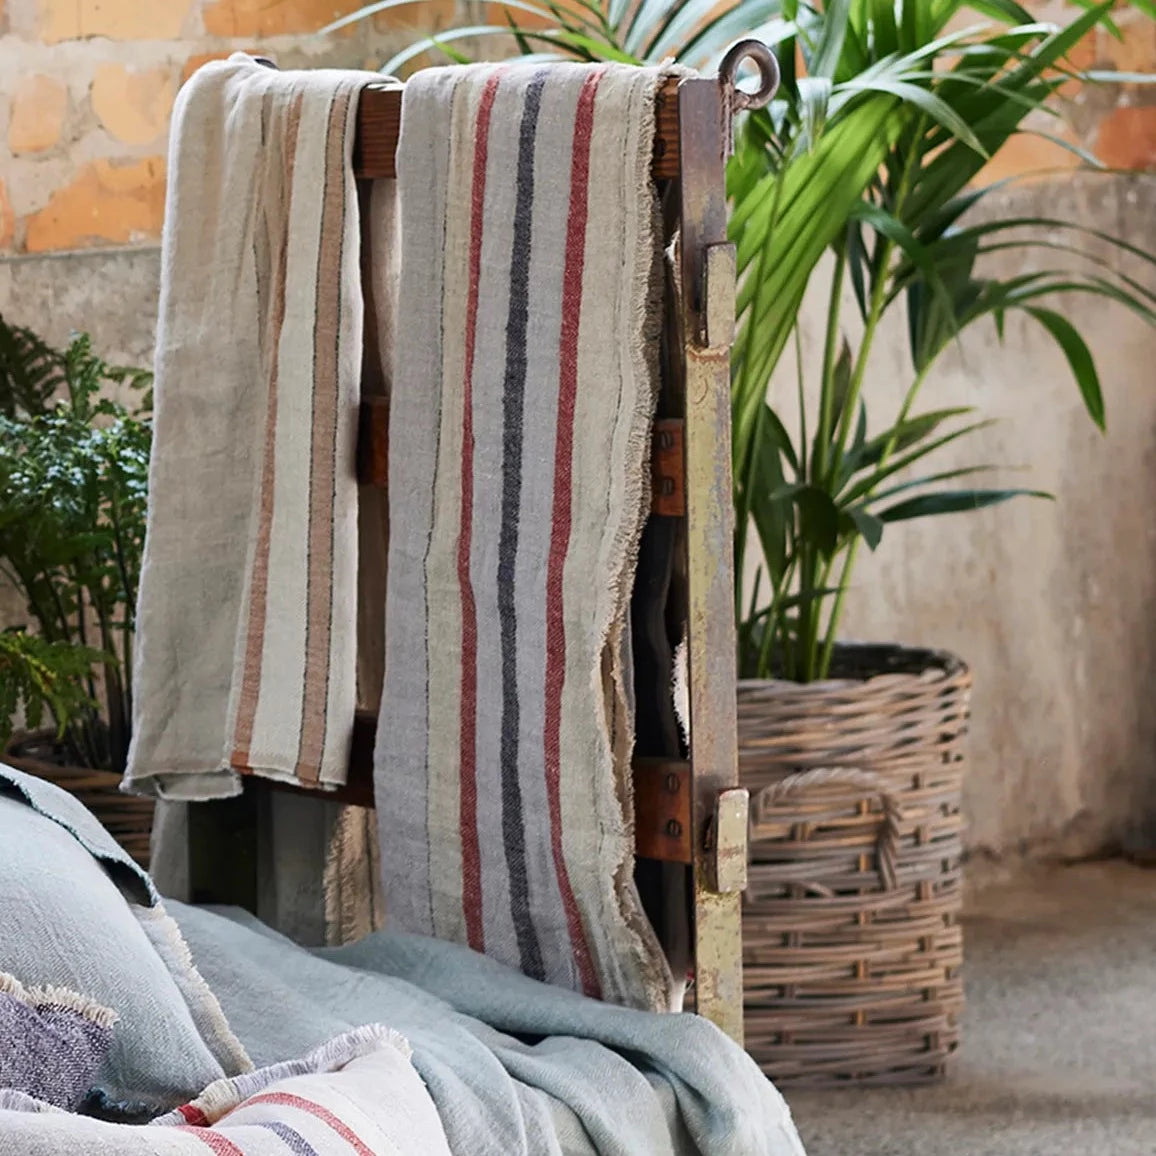 French Linen Throws